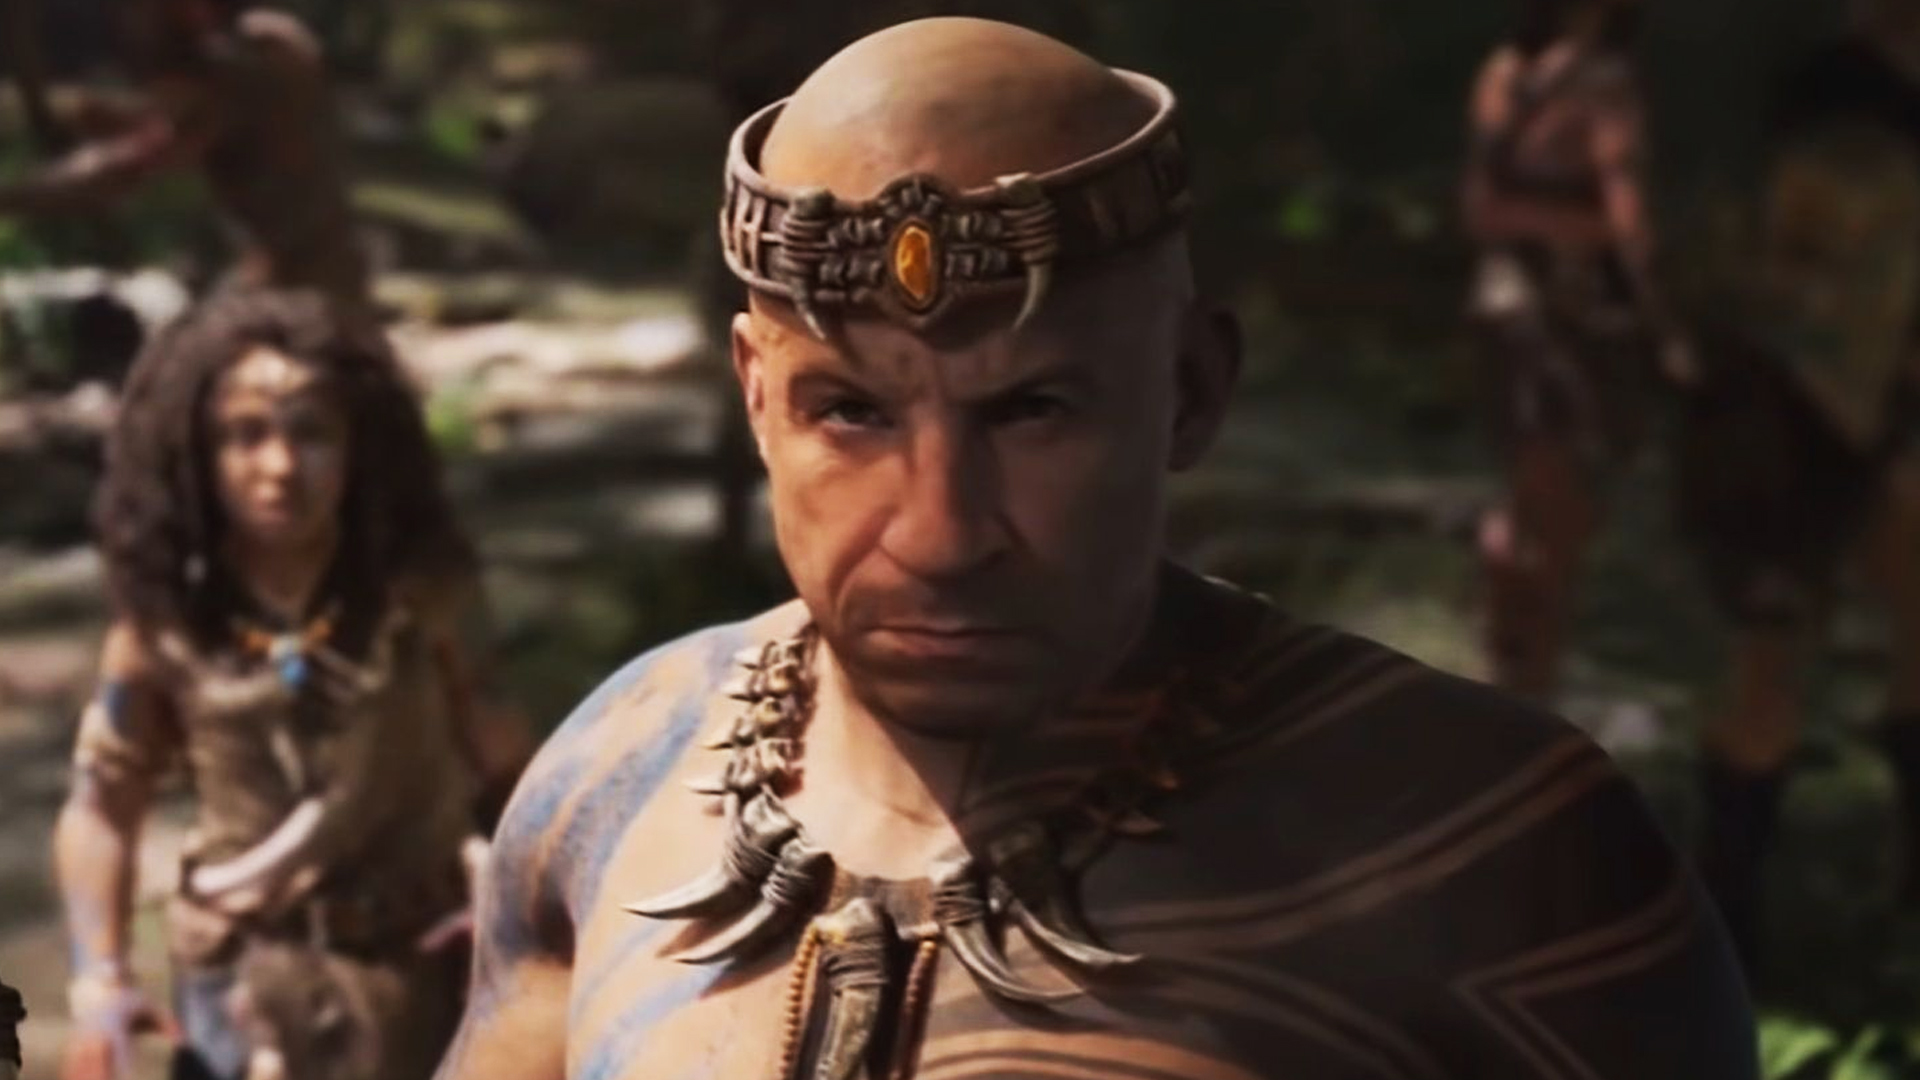 Ark 2 with Vin Diesel revealed at The Game Awards